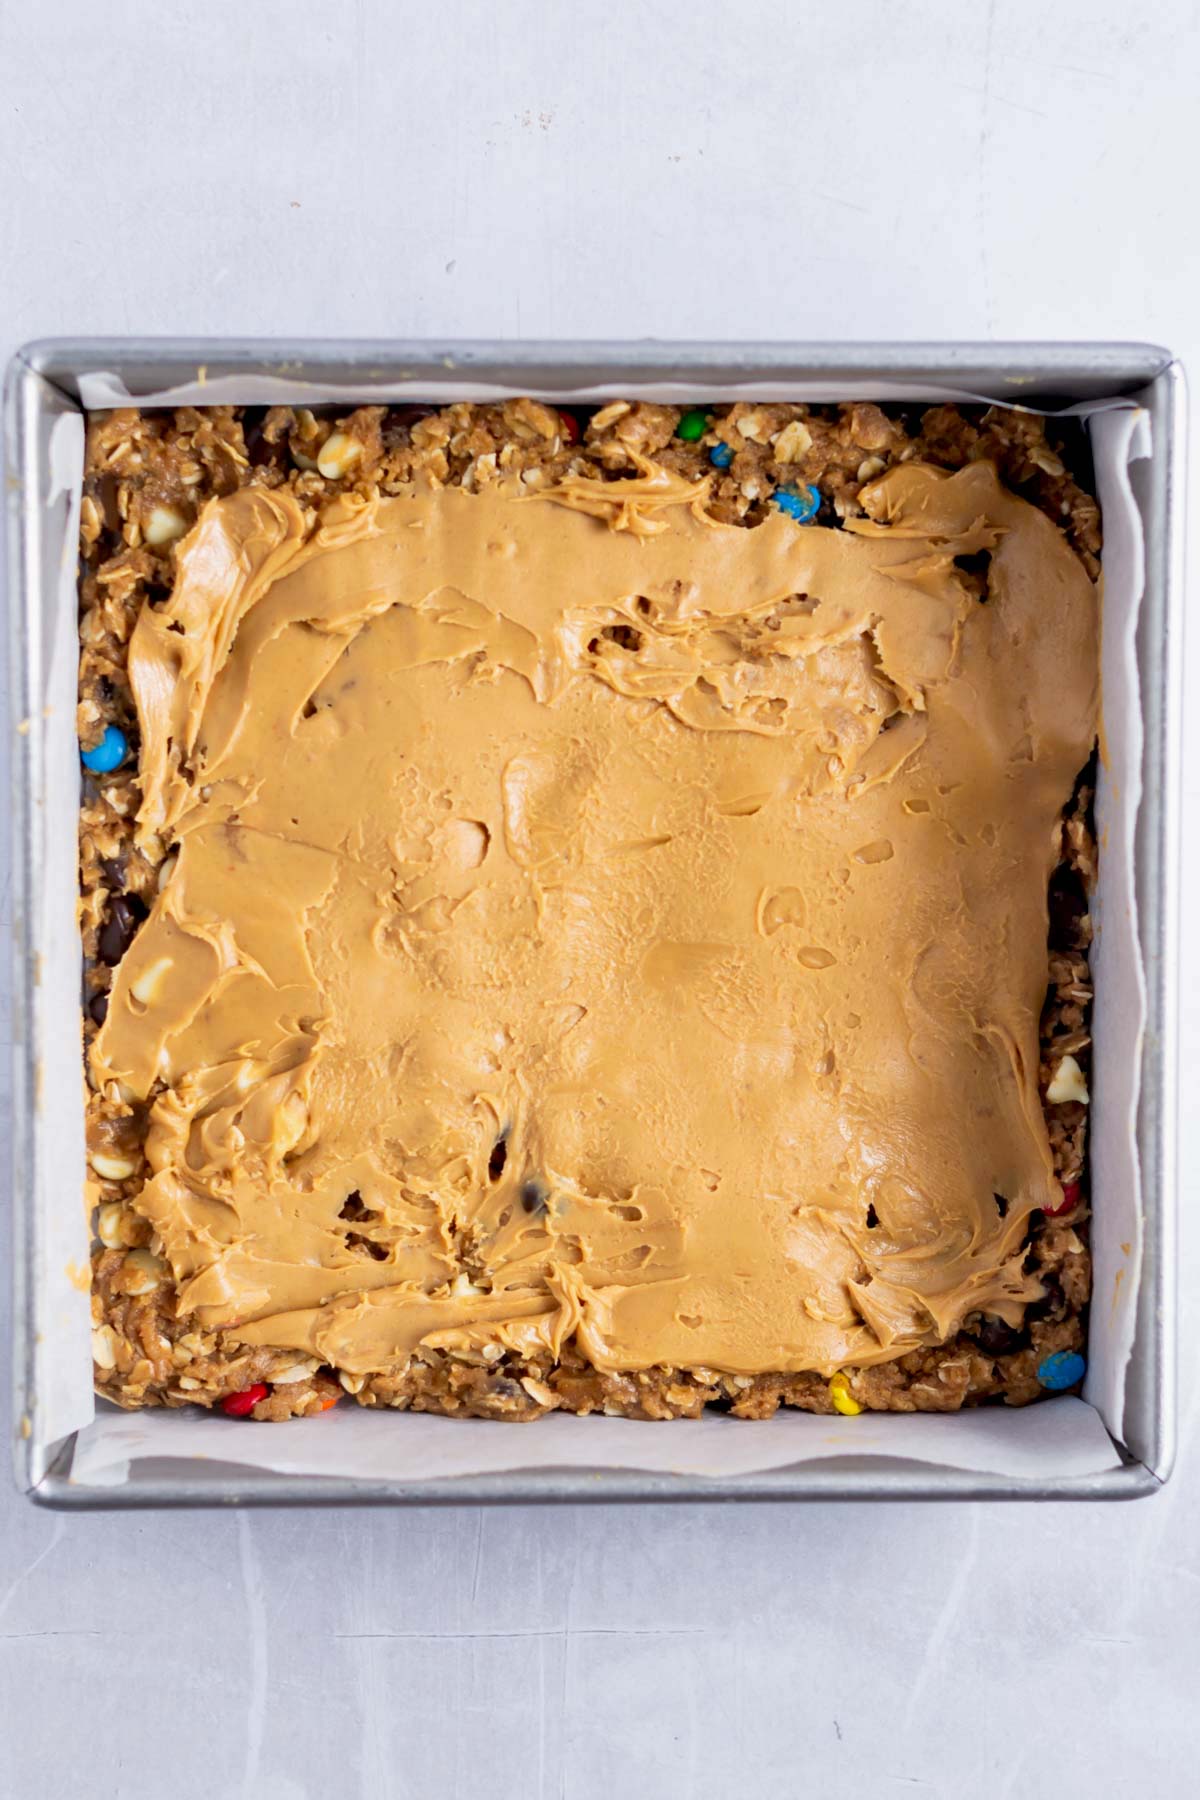 peanut butter layer over bottom layer of cookie dough in a baking pan